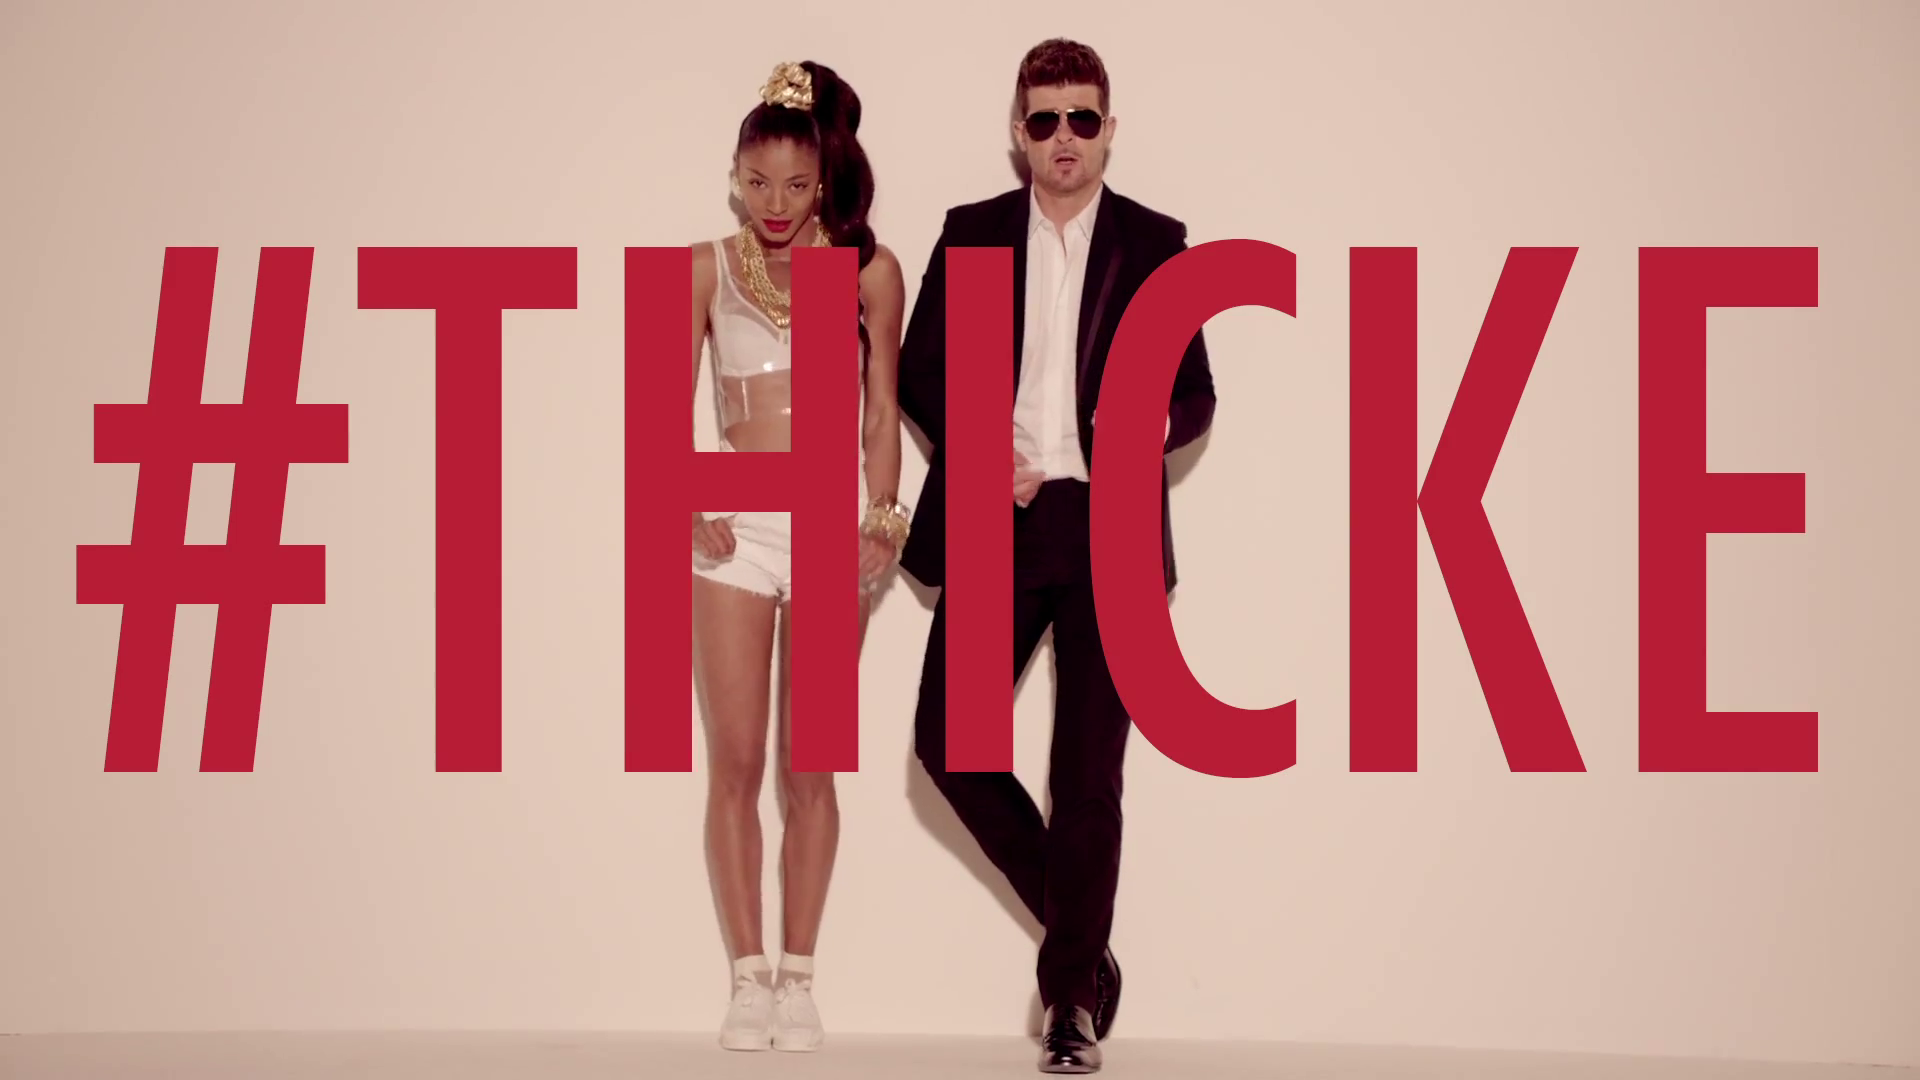 Robin Thicke blurred lines. Robin Thicke blurred lines ft. T.I., Pharrell. Robin Thicke личная жизнь. Pharrell Williams and Robin Thicke.